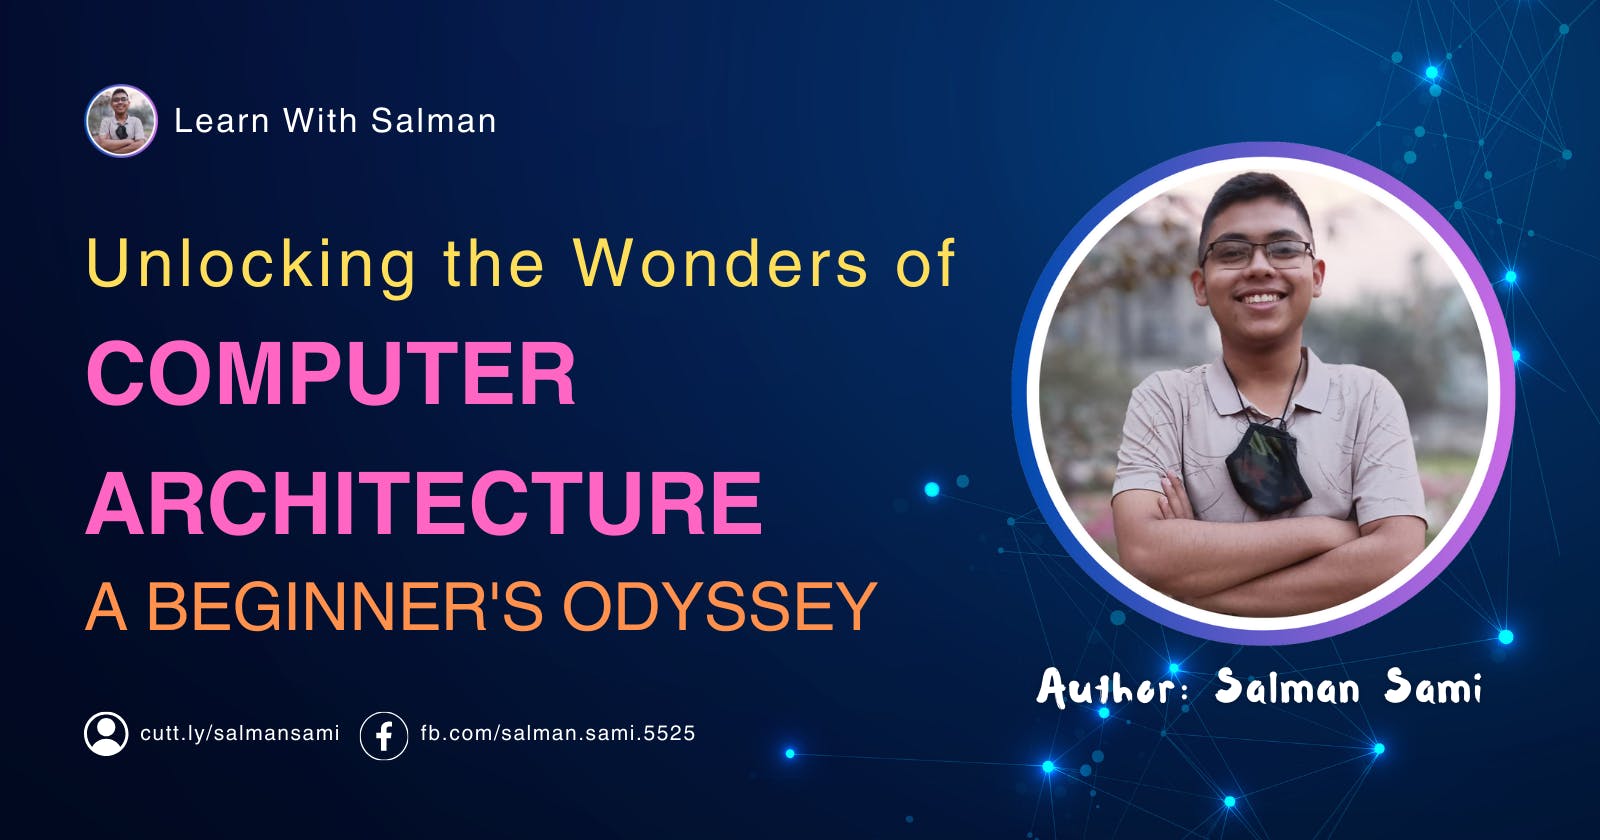 Unlocking the Wonders of Computer Architecture: A Beginner's Odyssey